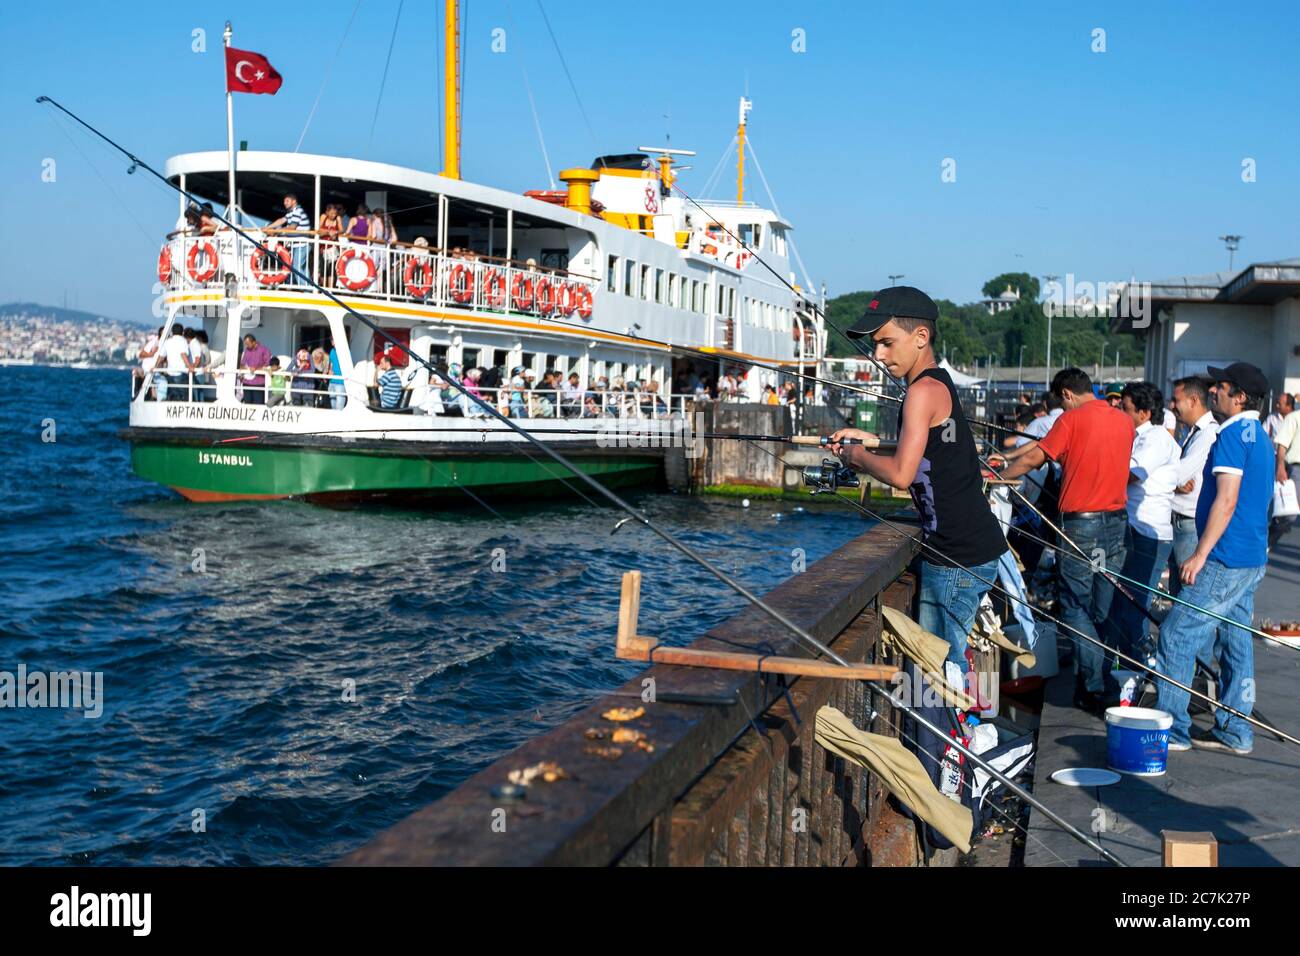 Fishermen cast their lines into Golden Horn at Eminonu in Istanbul in Turkey. In the background is one of the many passenger ferry boats. Stock Photo